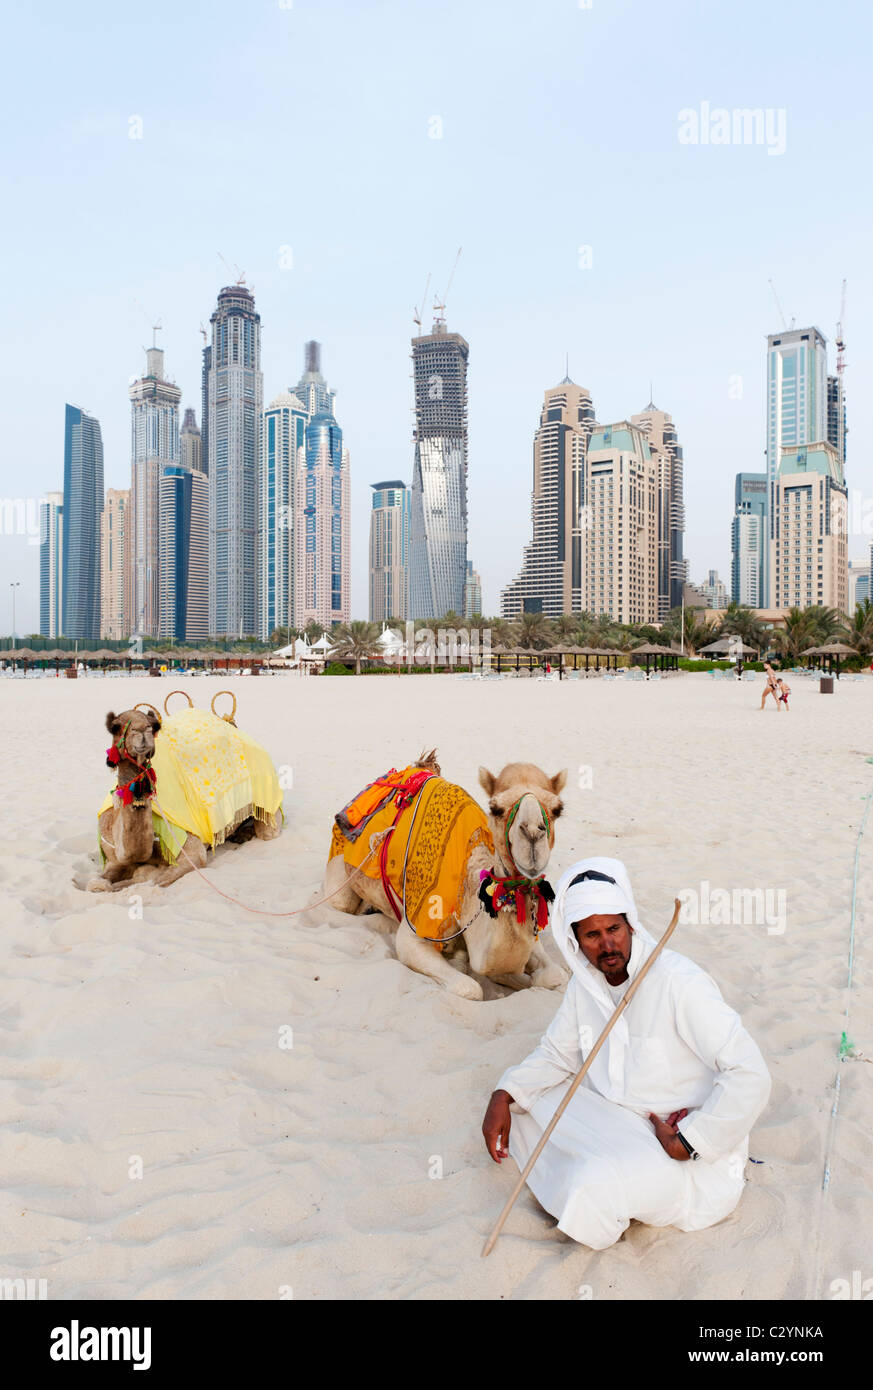 Camels on beach at Jumeirah Beach resort district with high rise buildings to rear in Dubai, United Arab Emirates,UAE Stock Photo